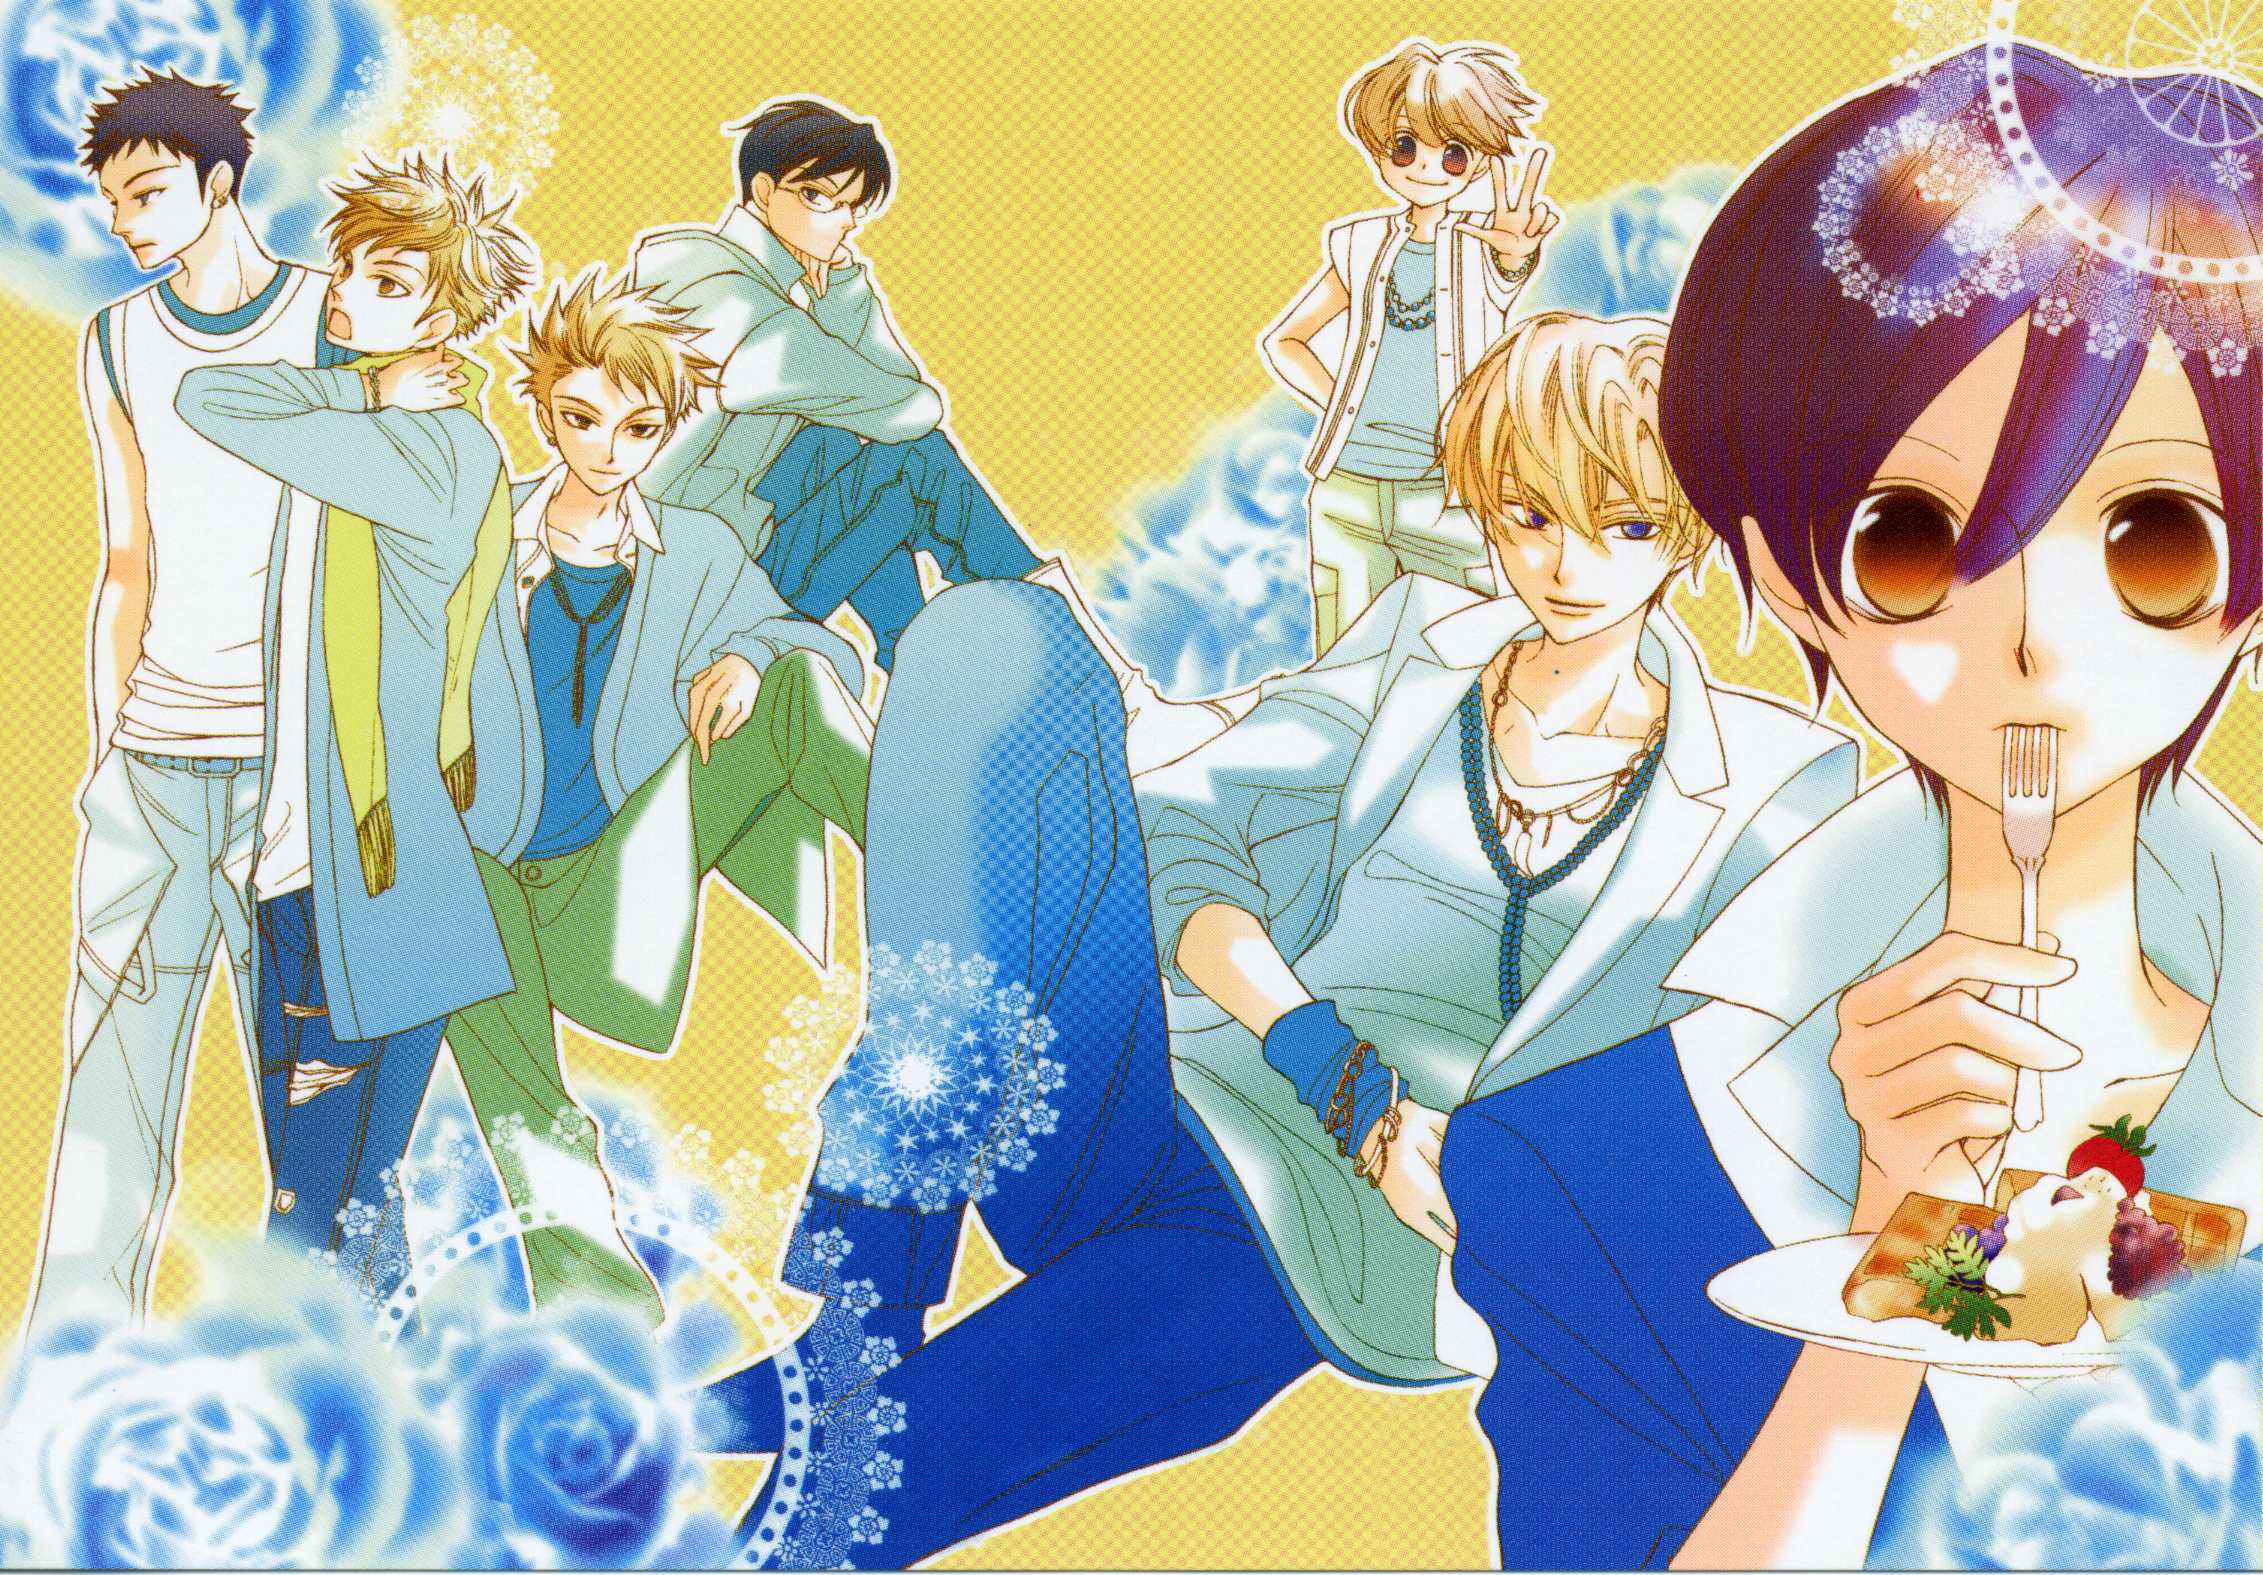 HD wallpaper featuring characters from Ouran High School Host Club, with a bright, floral background.